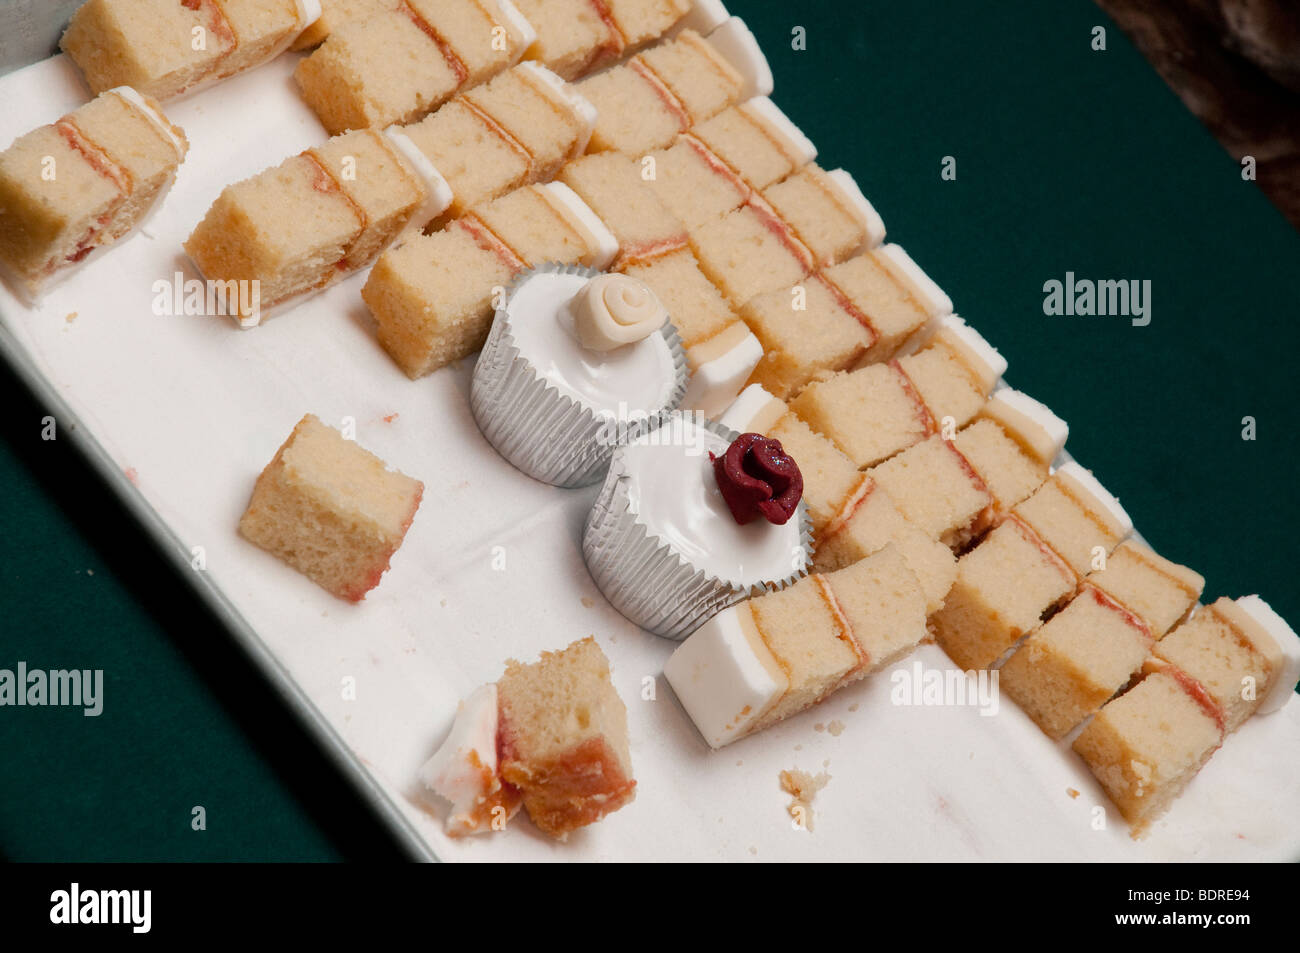 Slices Of Wedding Cake Served On A Tray With Two Silver Foiled